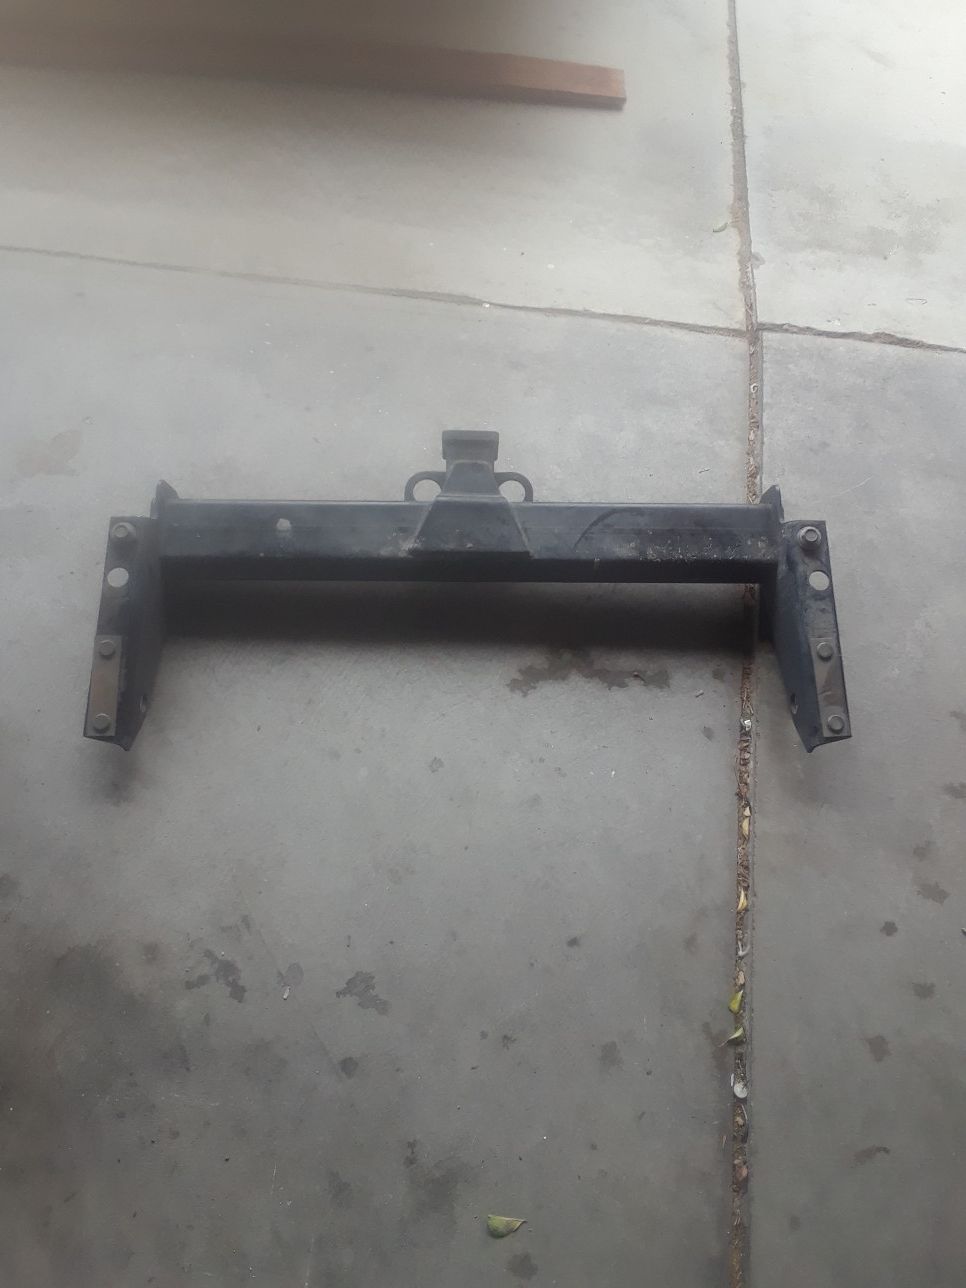 Trailer hitch for 94 to o3 gmc or chevy fullcise sale or trader for trailer jack